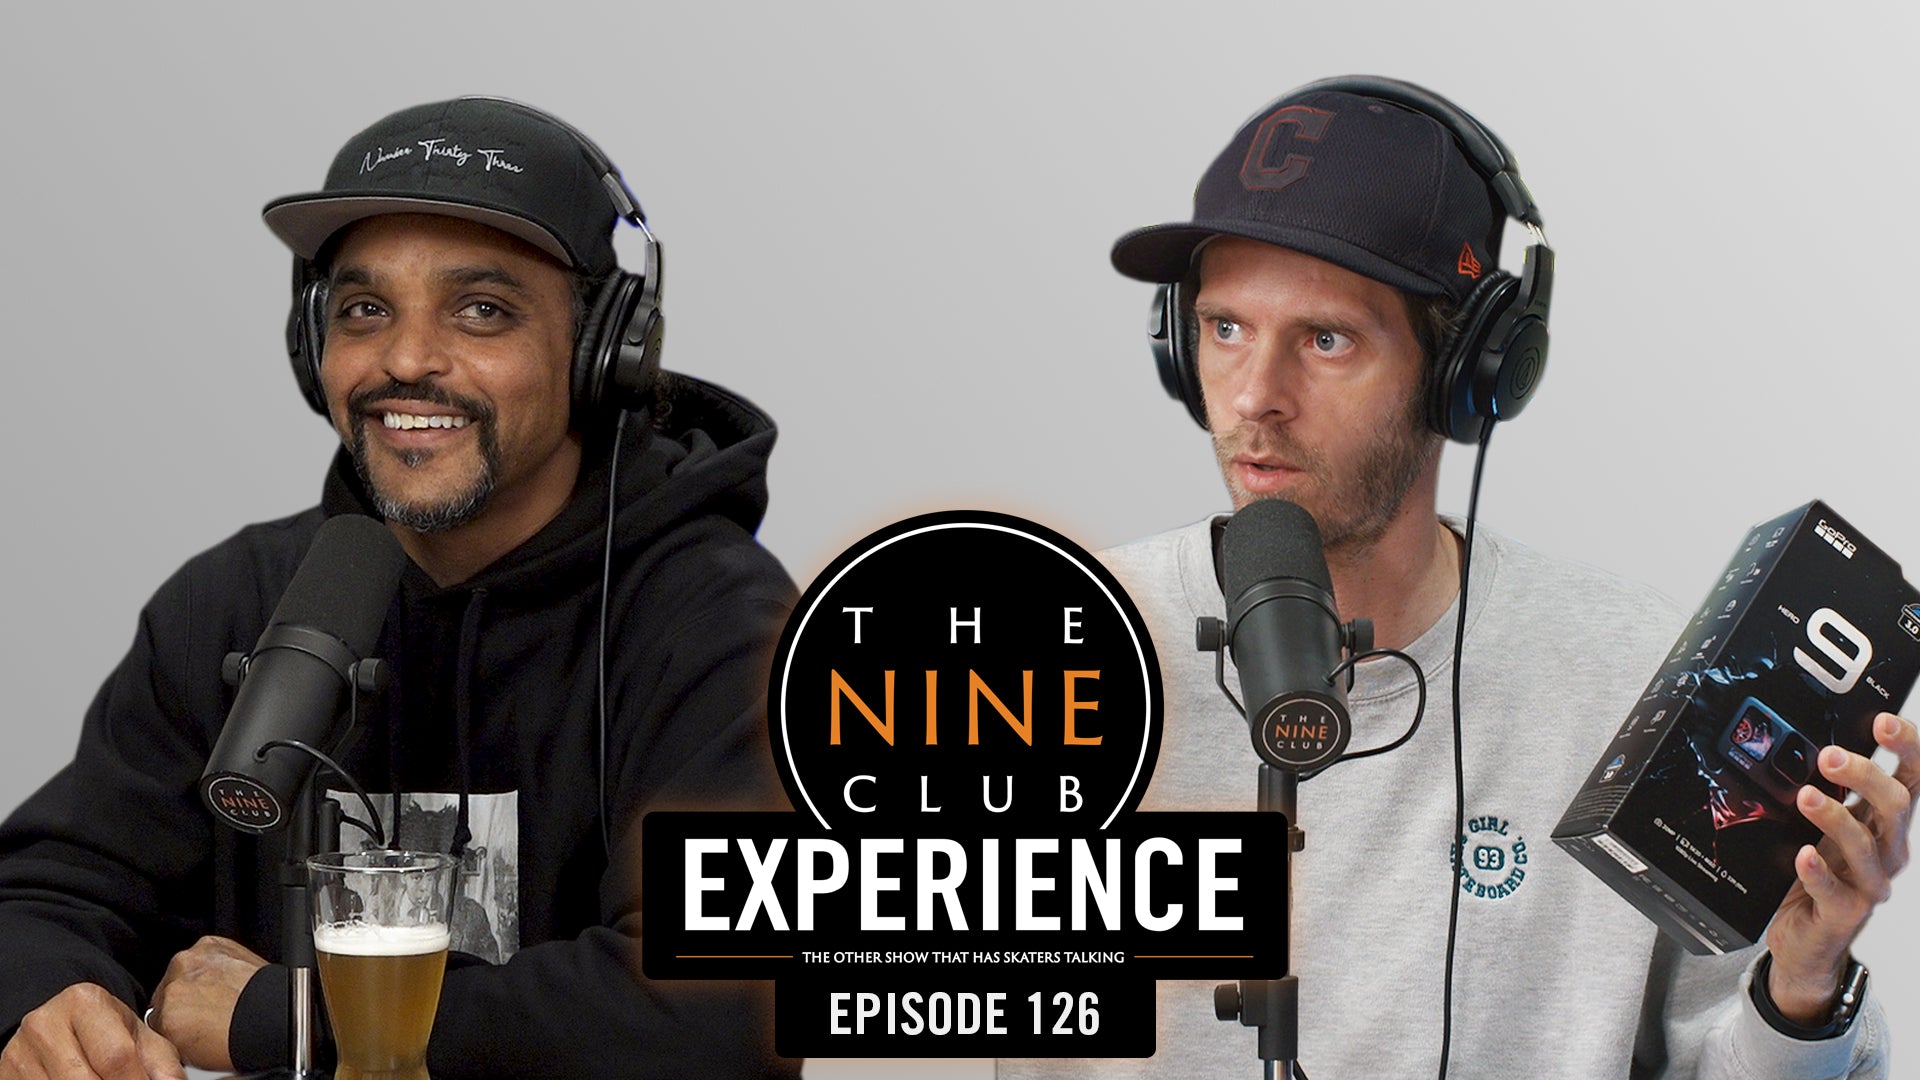 The Nine Club Experience Episode 126